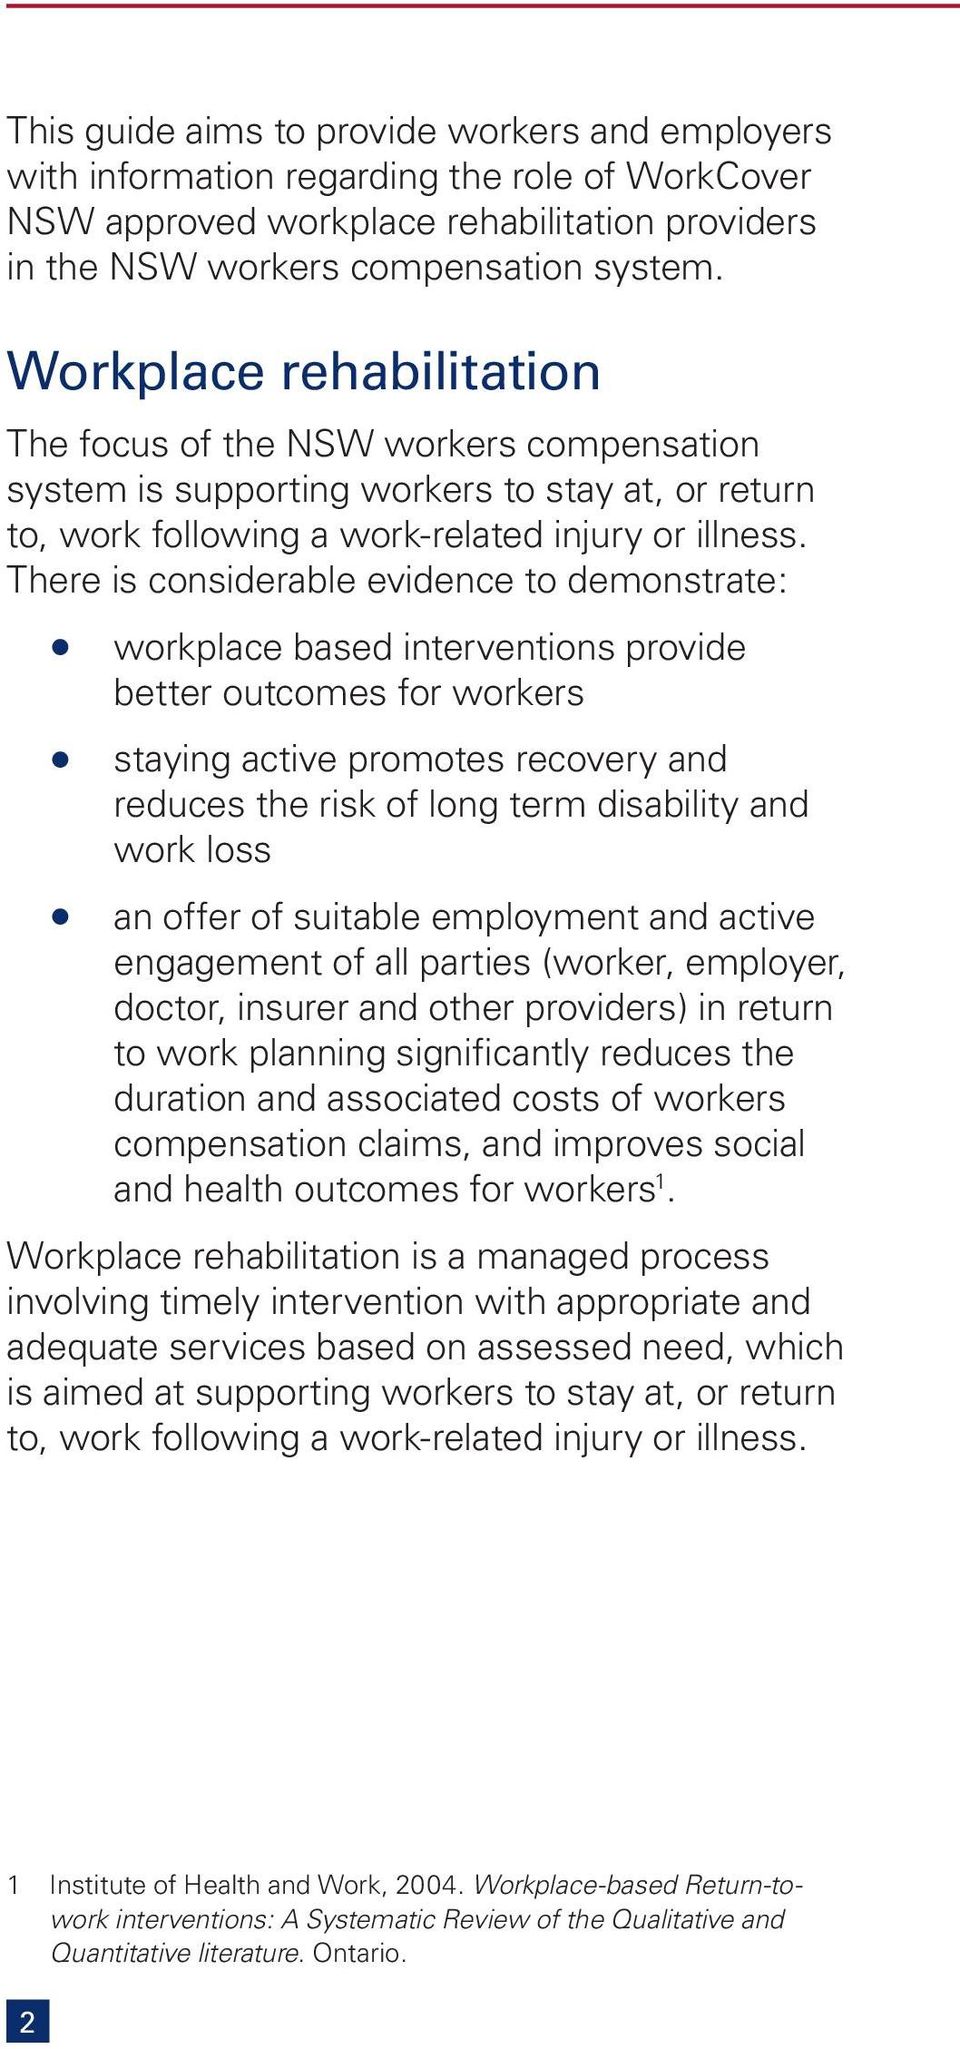 There is considerable evidence to demonstrate: workplace based interventions provide better outcomes for workers staying active promotes recovery and reduces the risk of long term disability and work